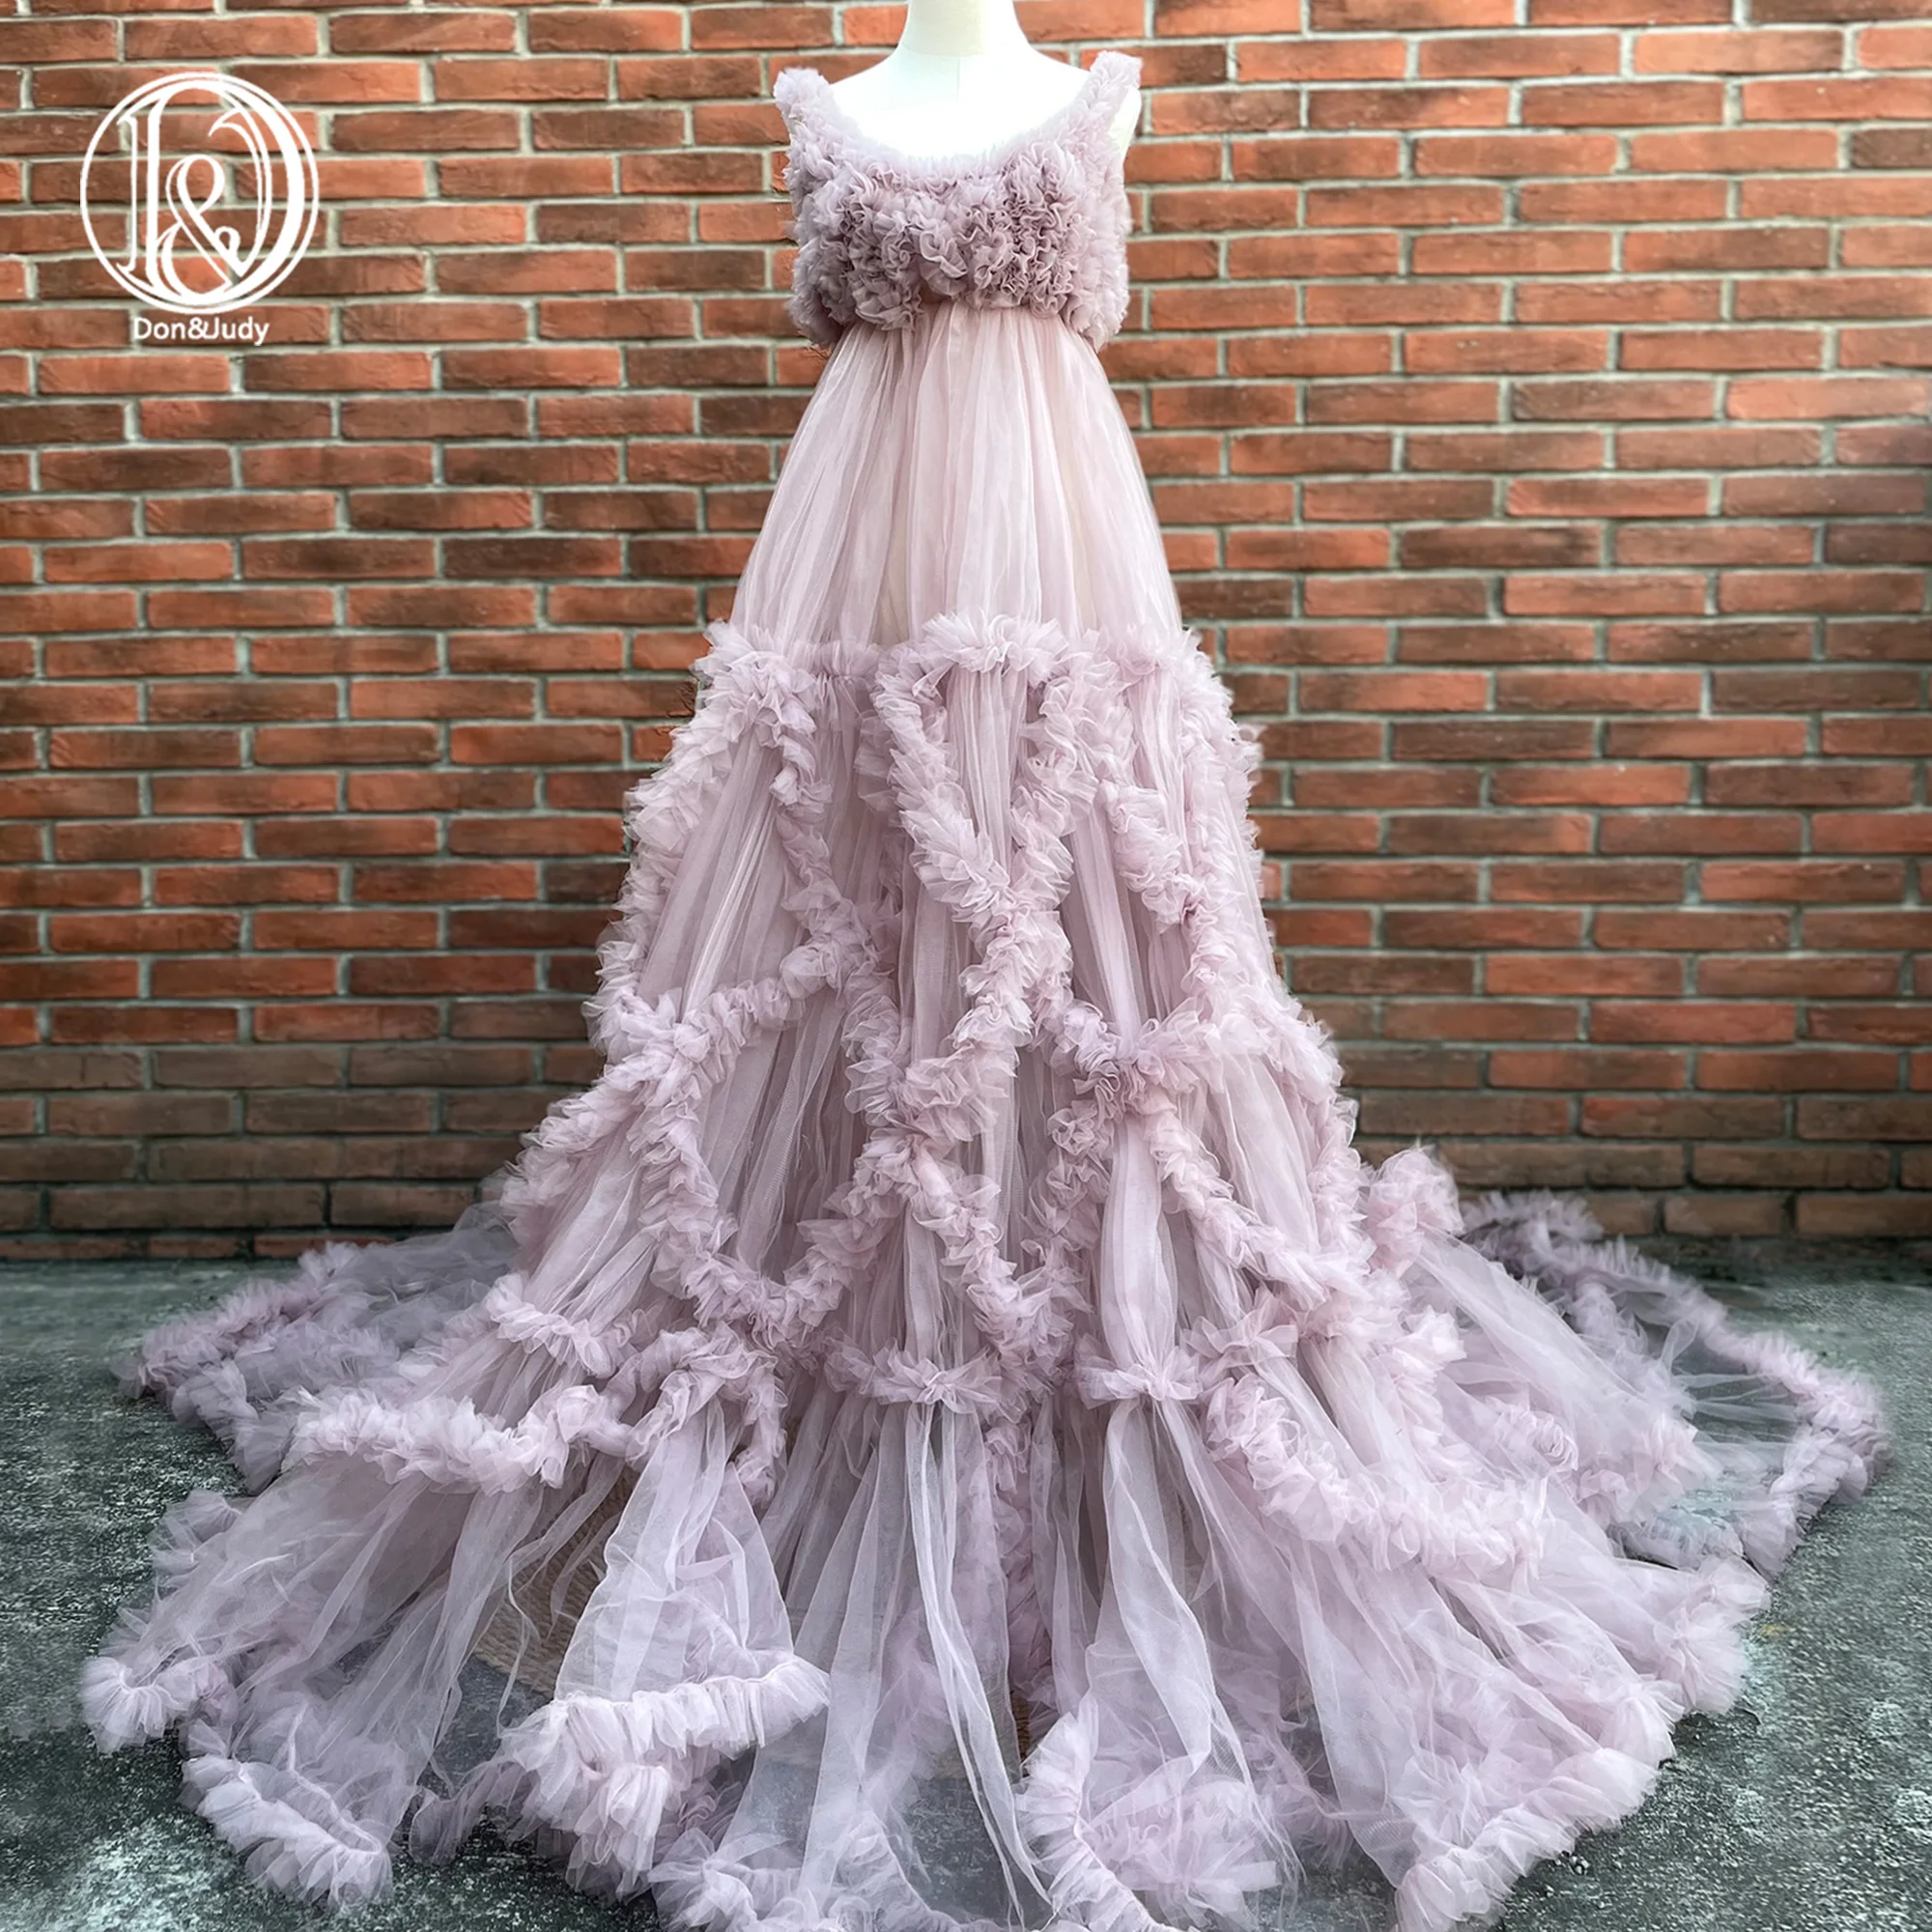 Don&Judy Luxury Pregnant Bridal Maternity Gown Fluffy Cloud Tulle Long Train Wedding Party Maxi Dress Light Purple 2022